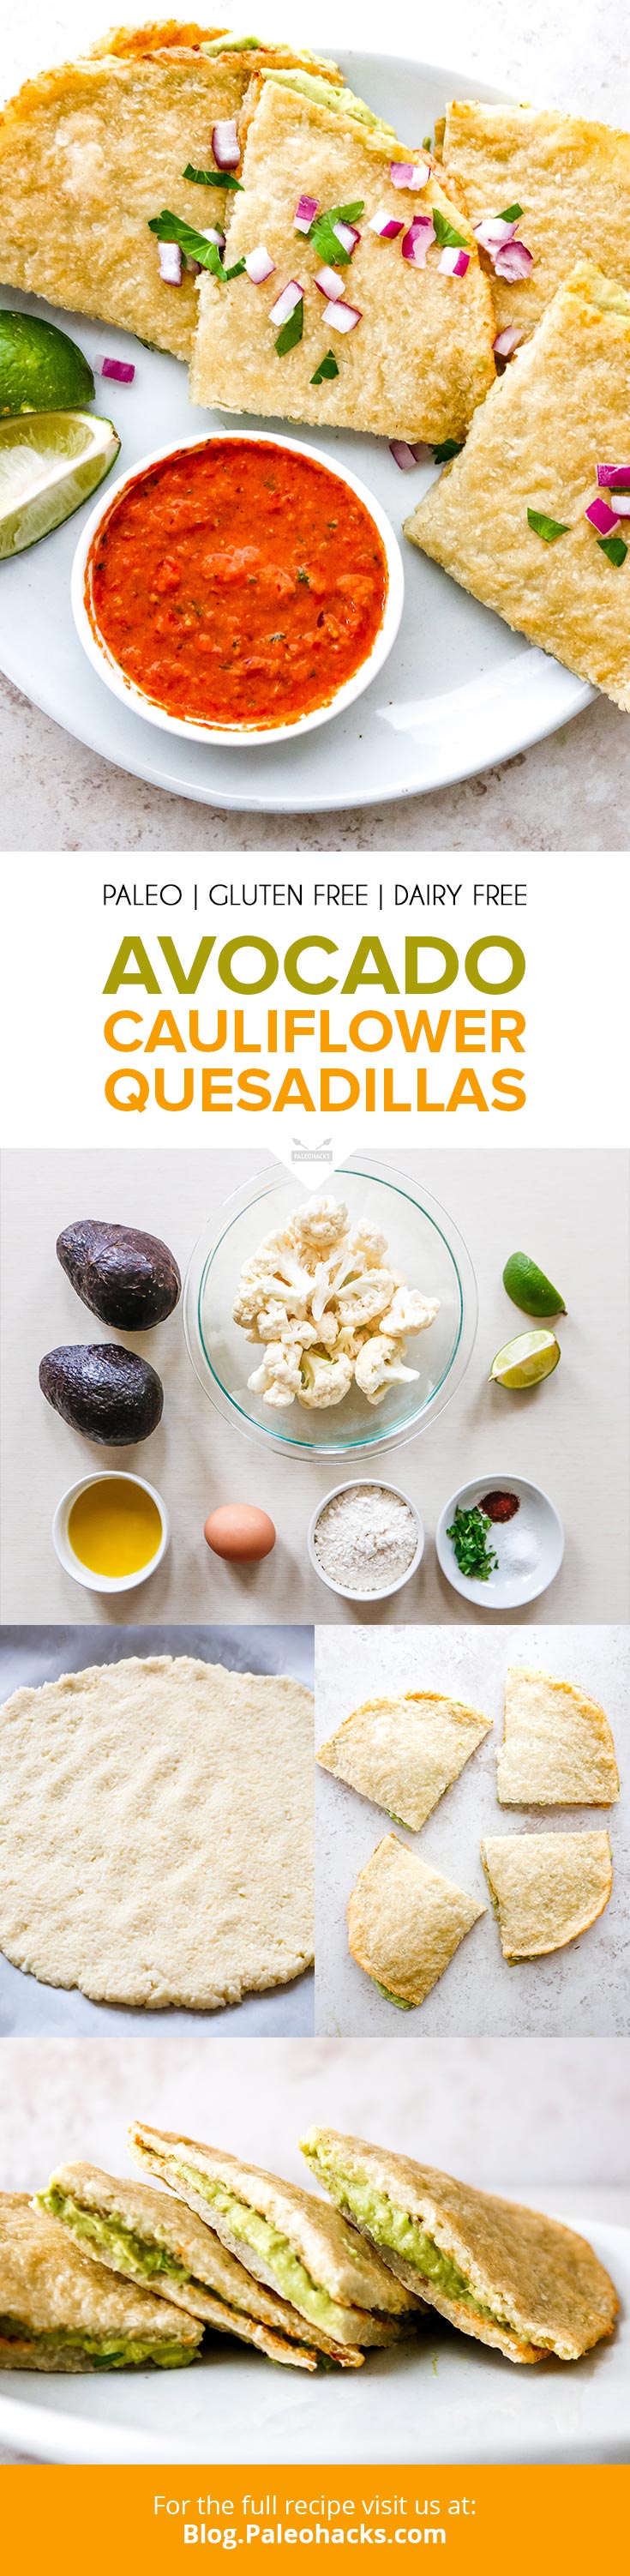 If you’re in need of a quesadilla fix, these filling and vitamin-rich cauliflower quesadillas stuffed with creamy avocado are sure to satisfy!